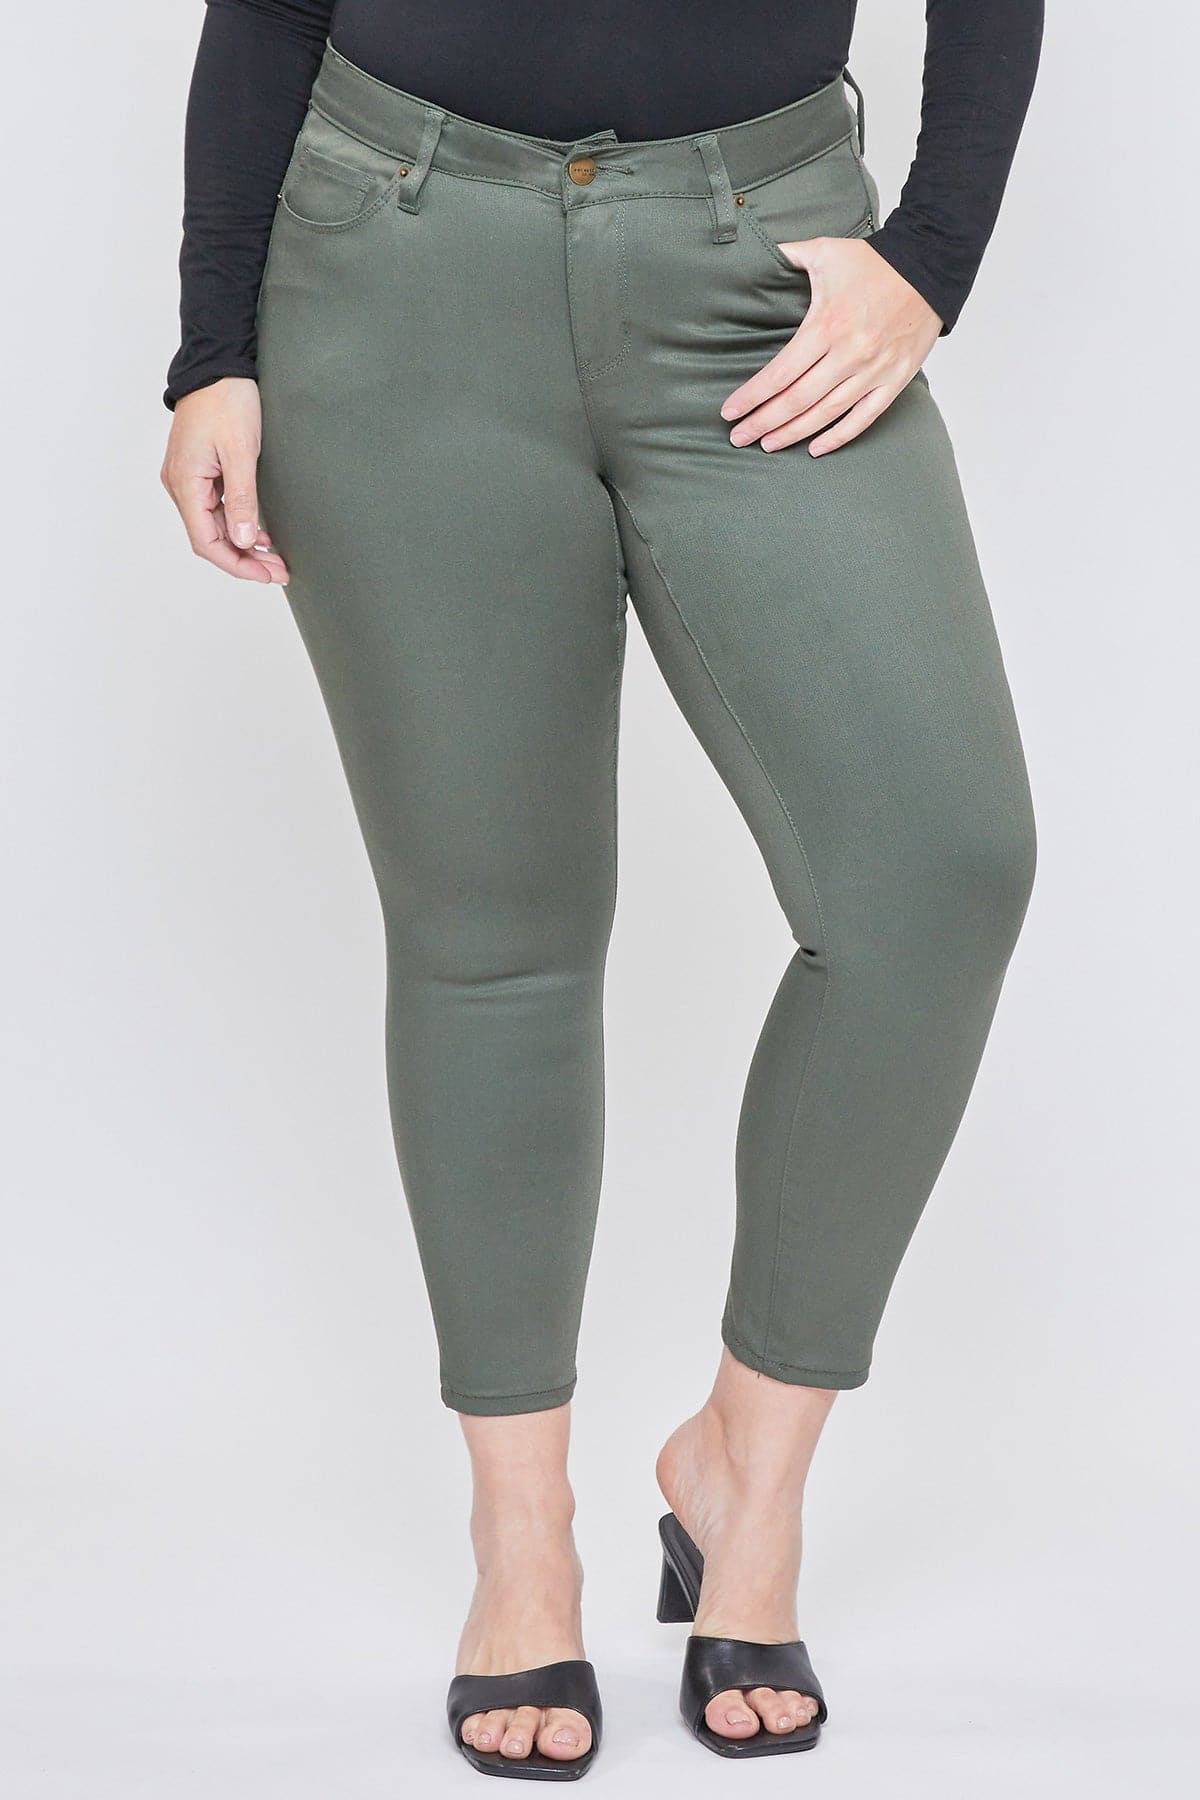 Women's Plus Size Mid Rise Hyperstretch Ankle Pants